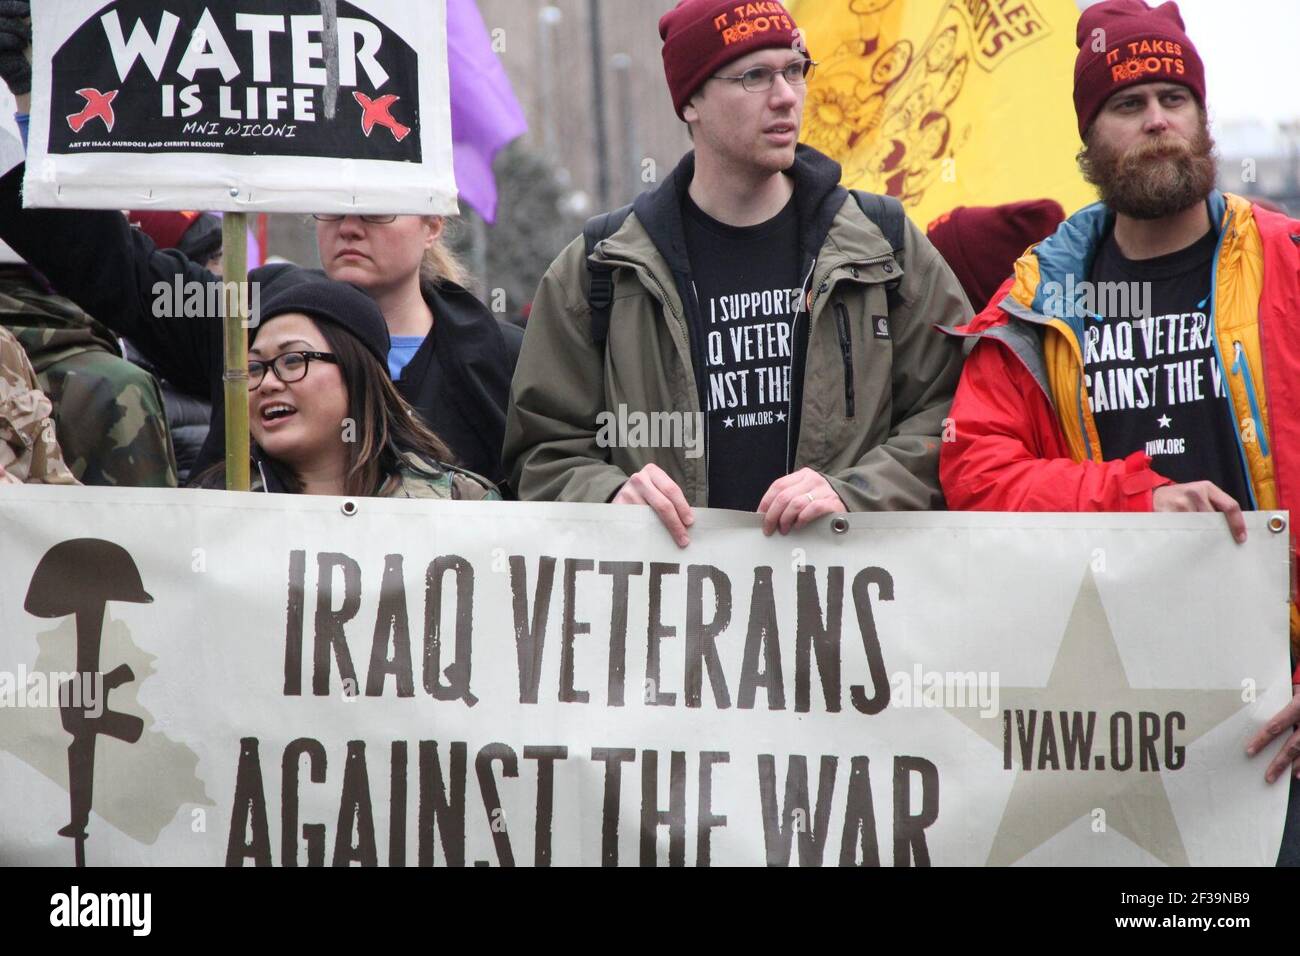 Protesters speak out against the war — and in support of water — as Donald Trump is sworn-in as the 45th President of the United States in Washington, D.C., Jan, 20, 2017. Stock Photo